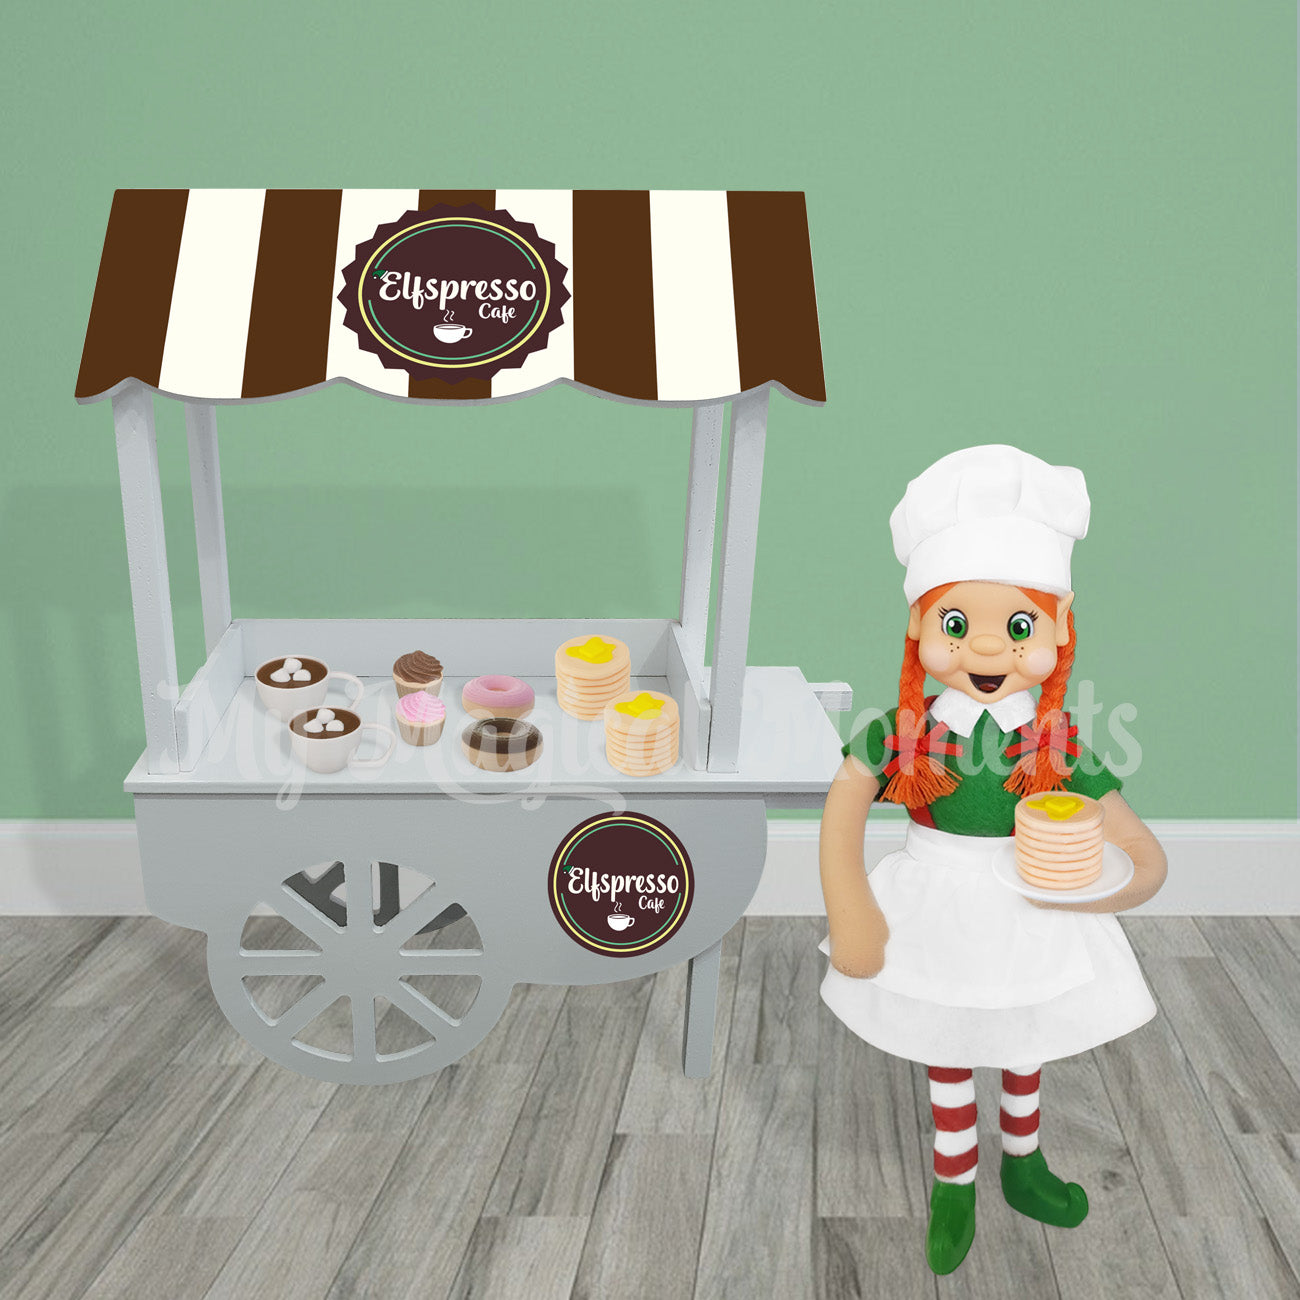 Elf selling pancakes, hot cocoa , donuts and cupcakes at a cafe